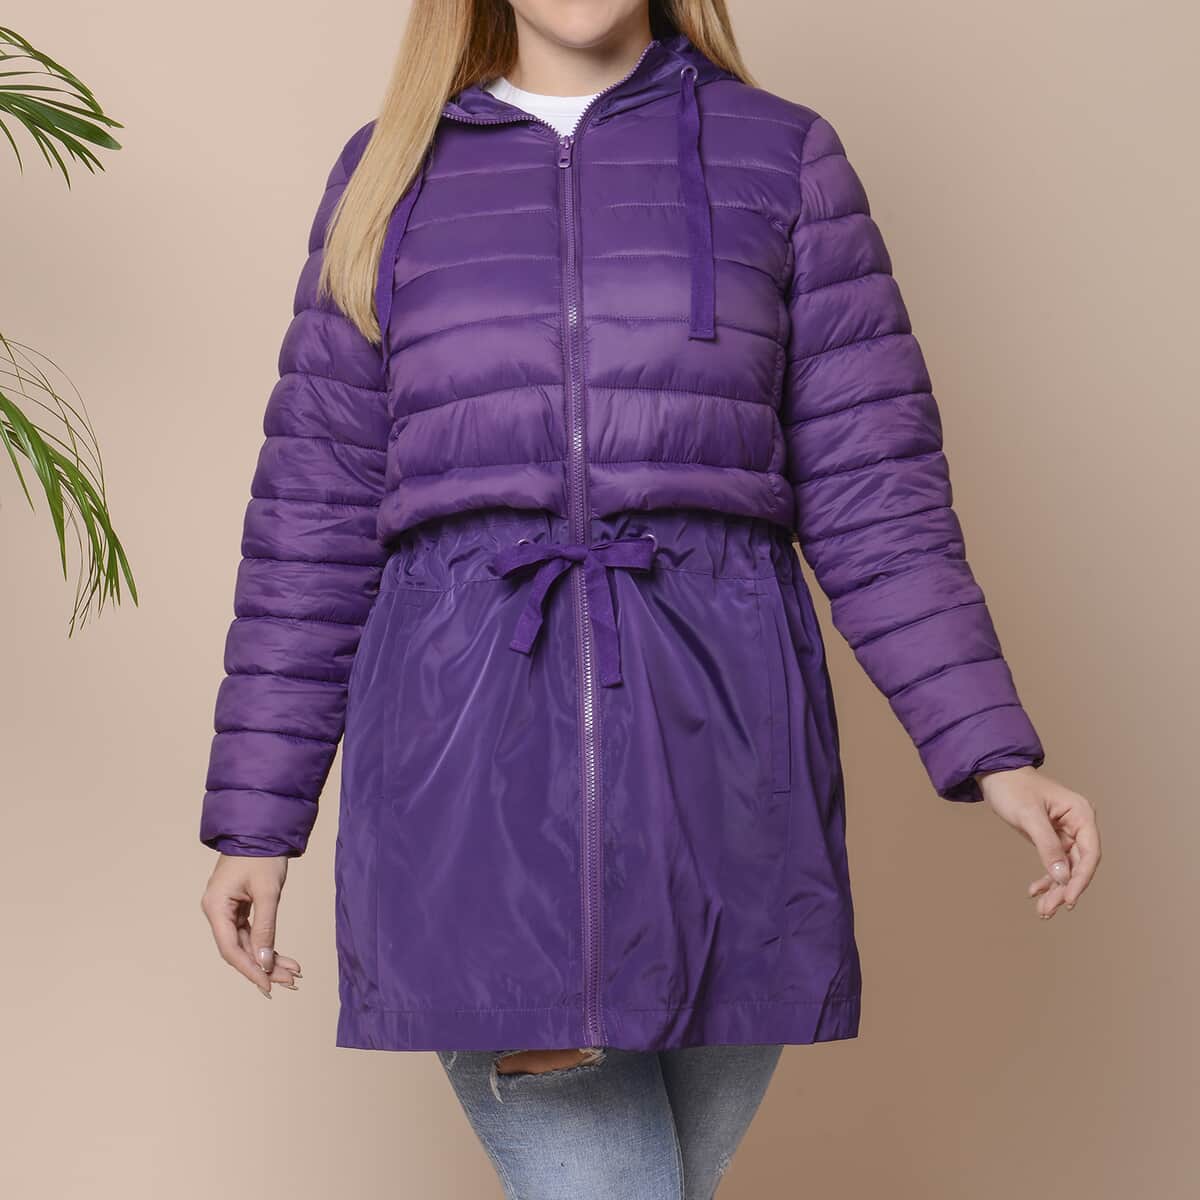 Passage Plum Purple Hooded Women's Coat with Sleeves - L image number 0